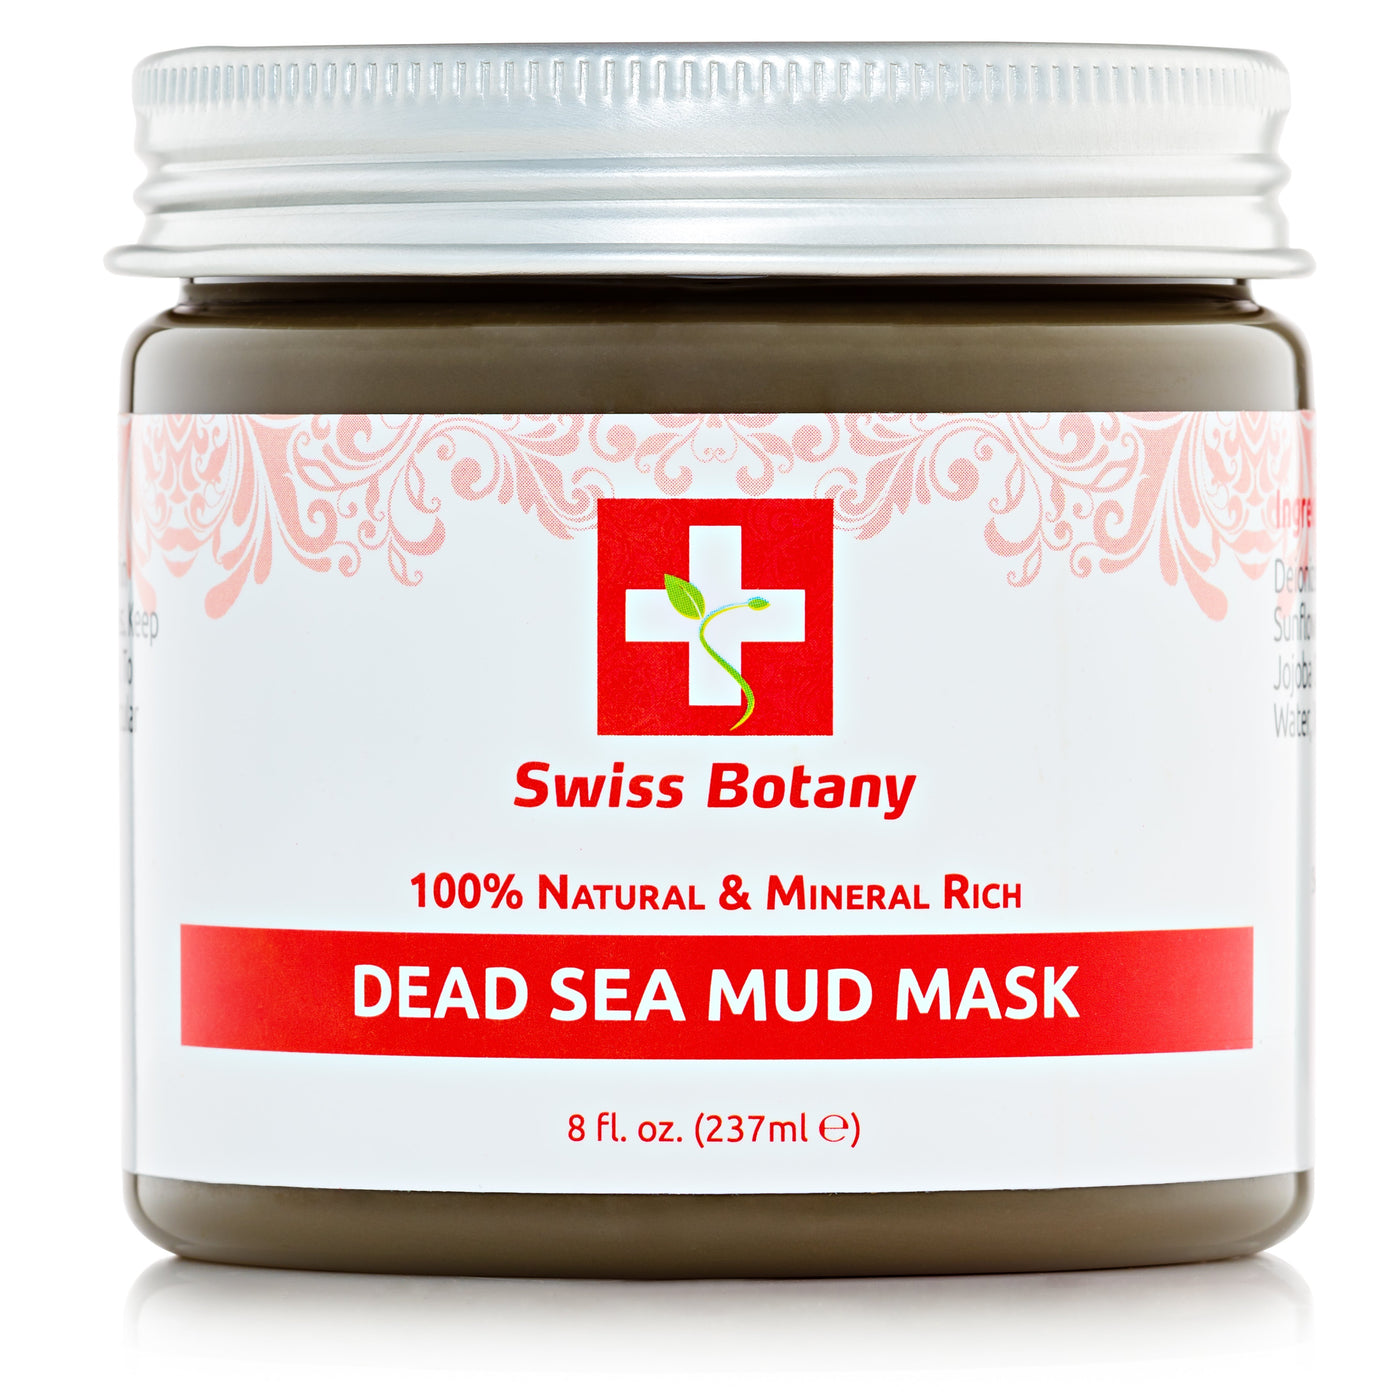 Swiss Botany face mask Dead Sea Mud Mask for Face & Body - 100% all Natural Organic Israeli Mud